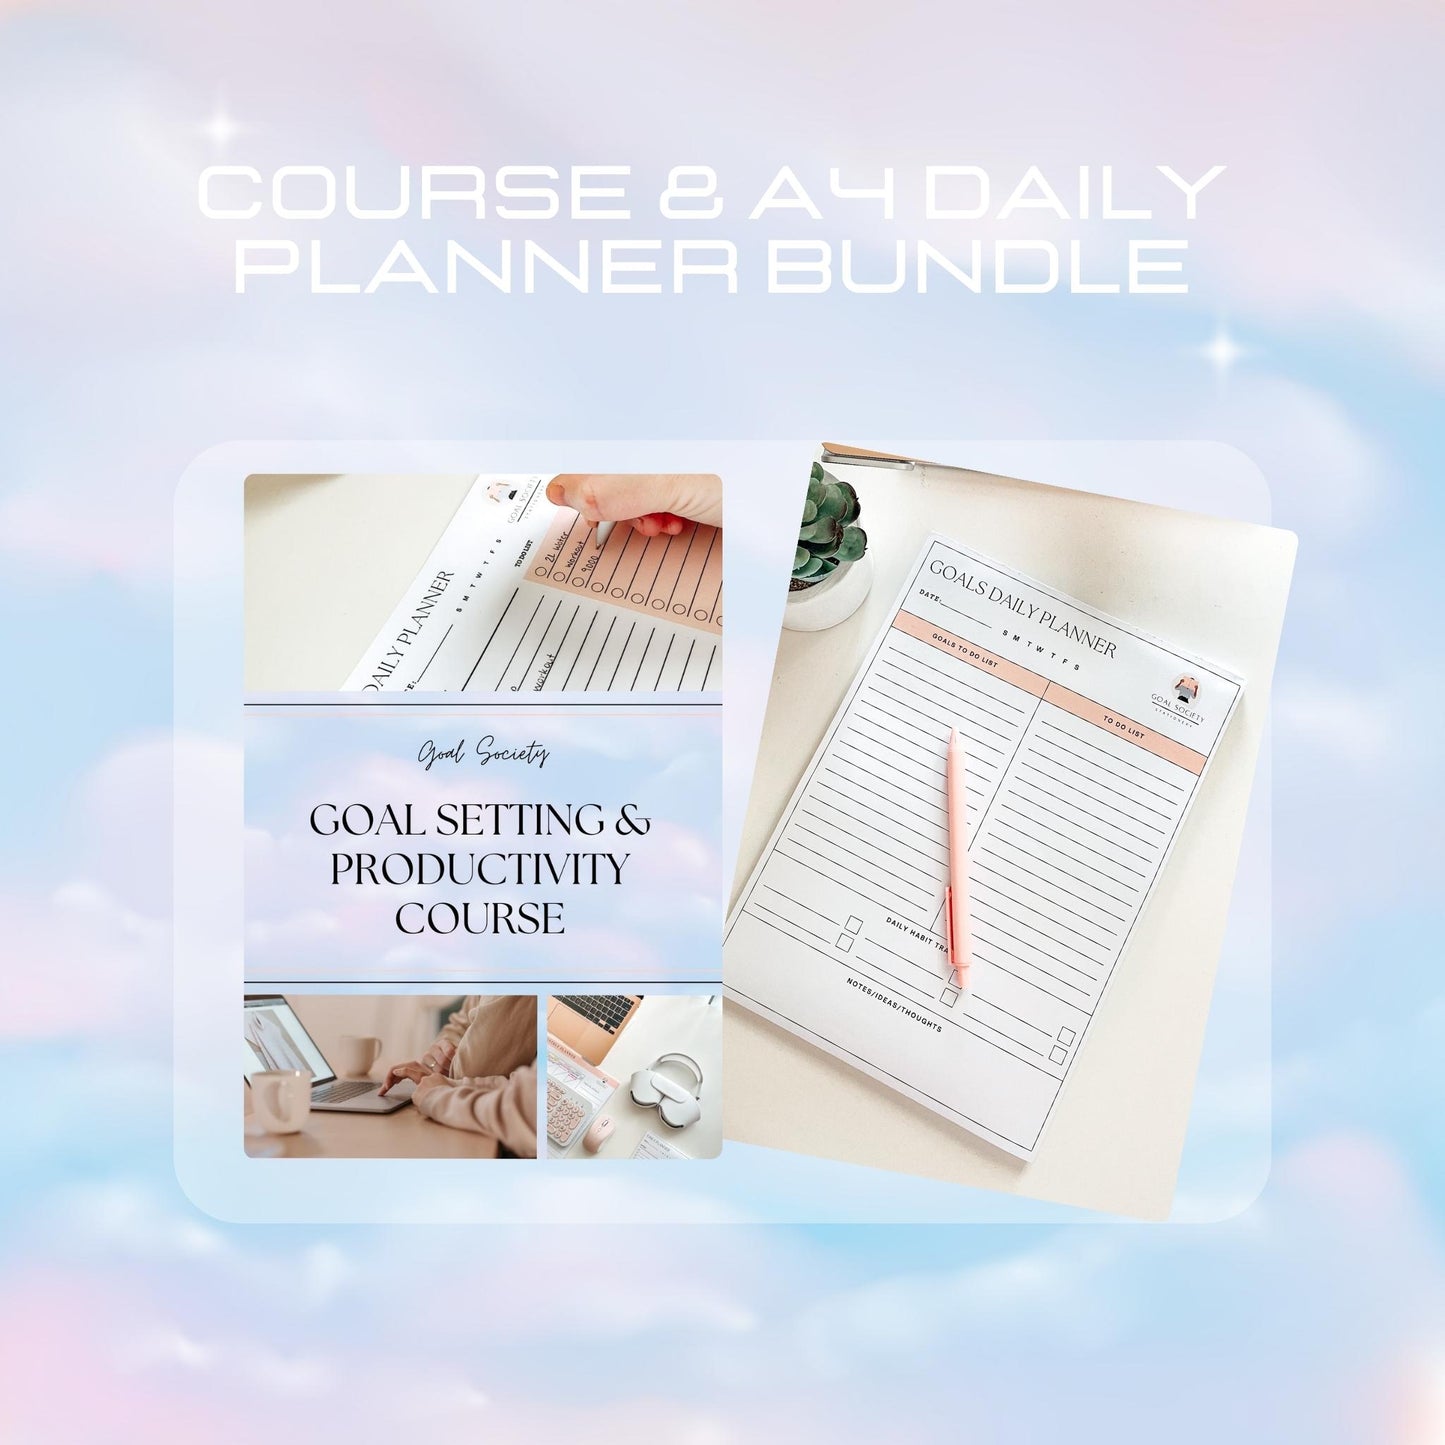 Goal Setting and Productivity Course and A4 Daily Planner Bundle